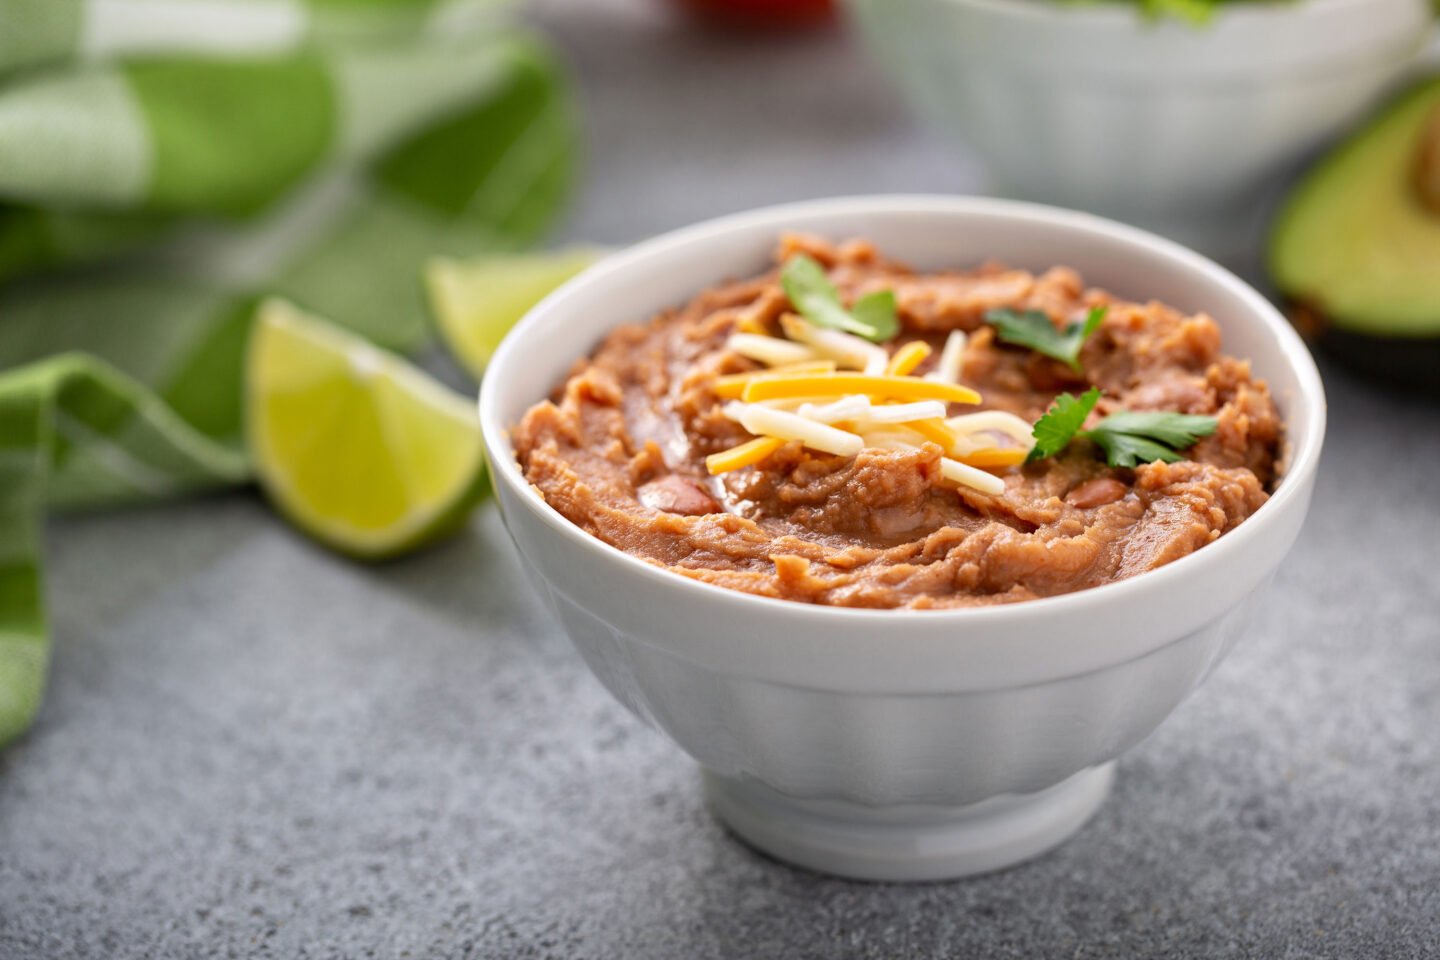 refried beans in a white bowl